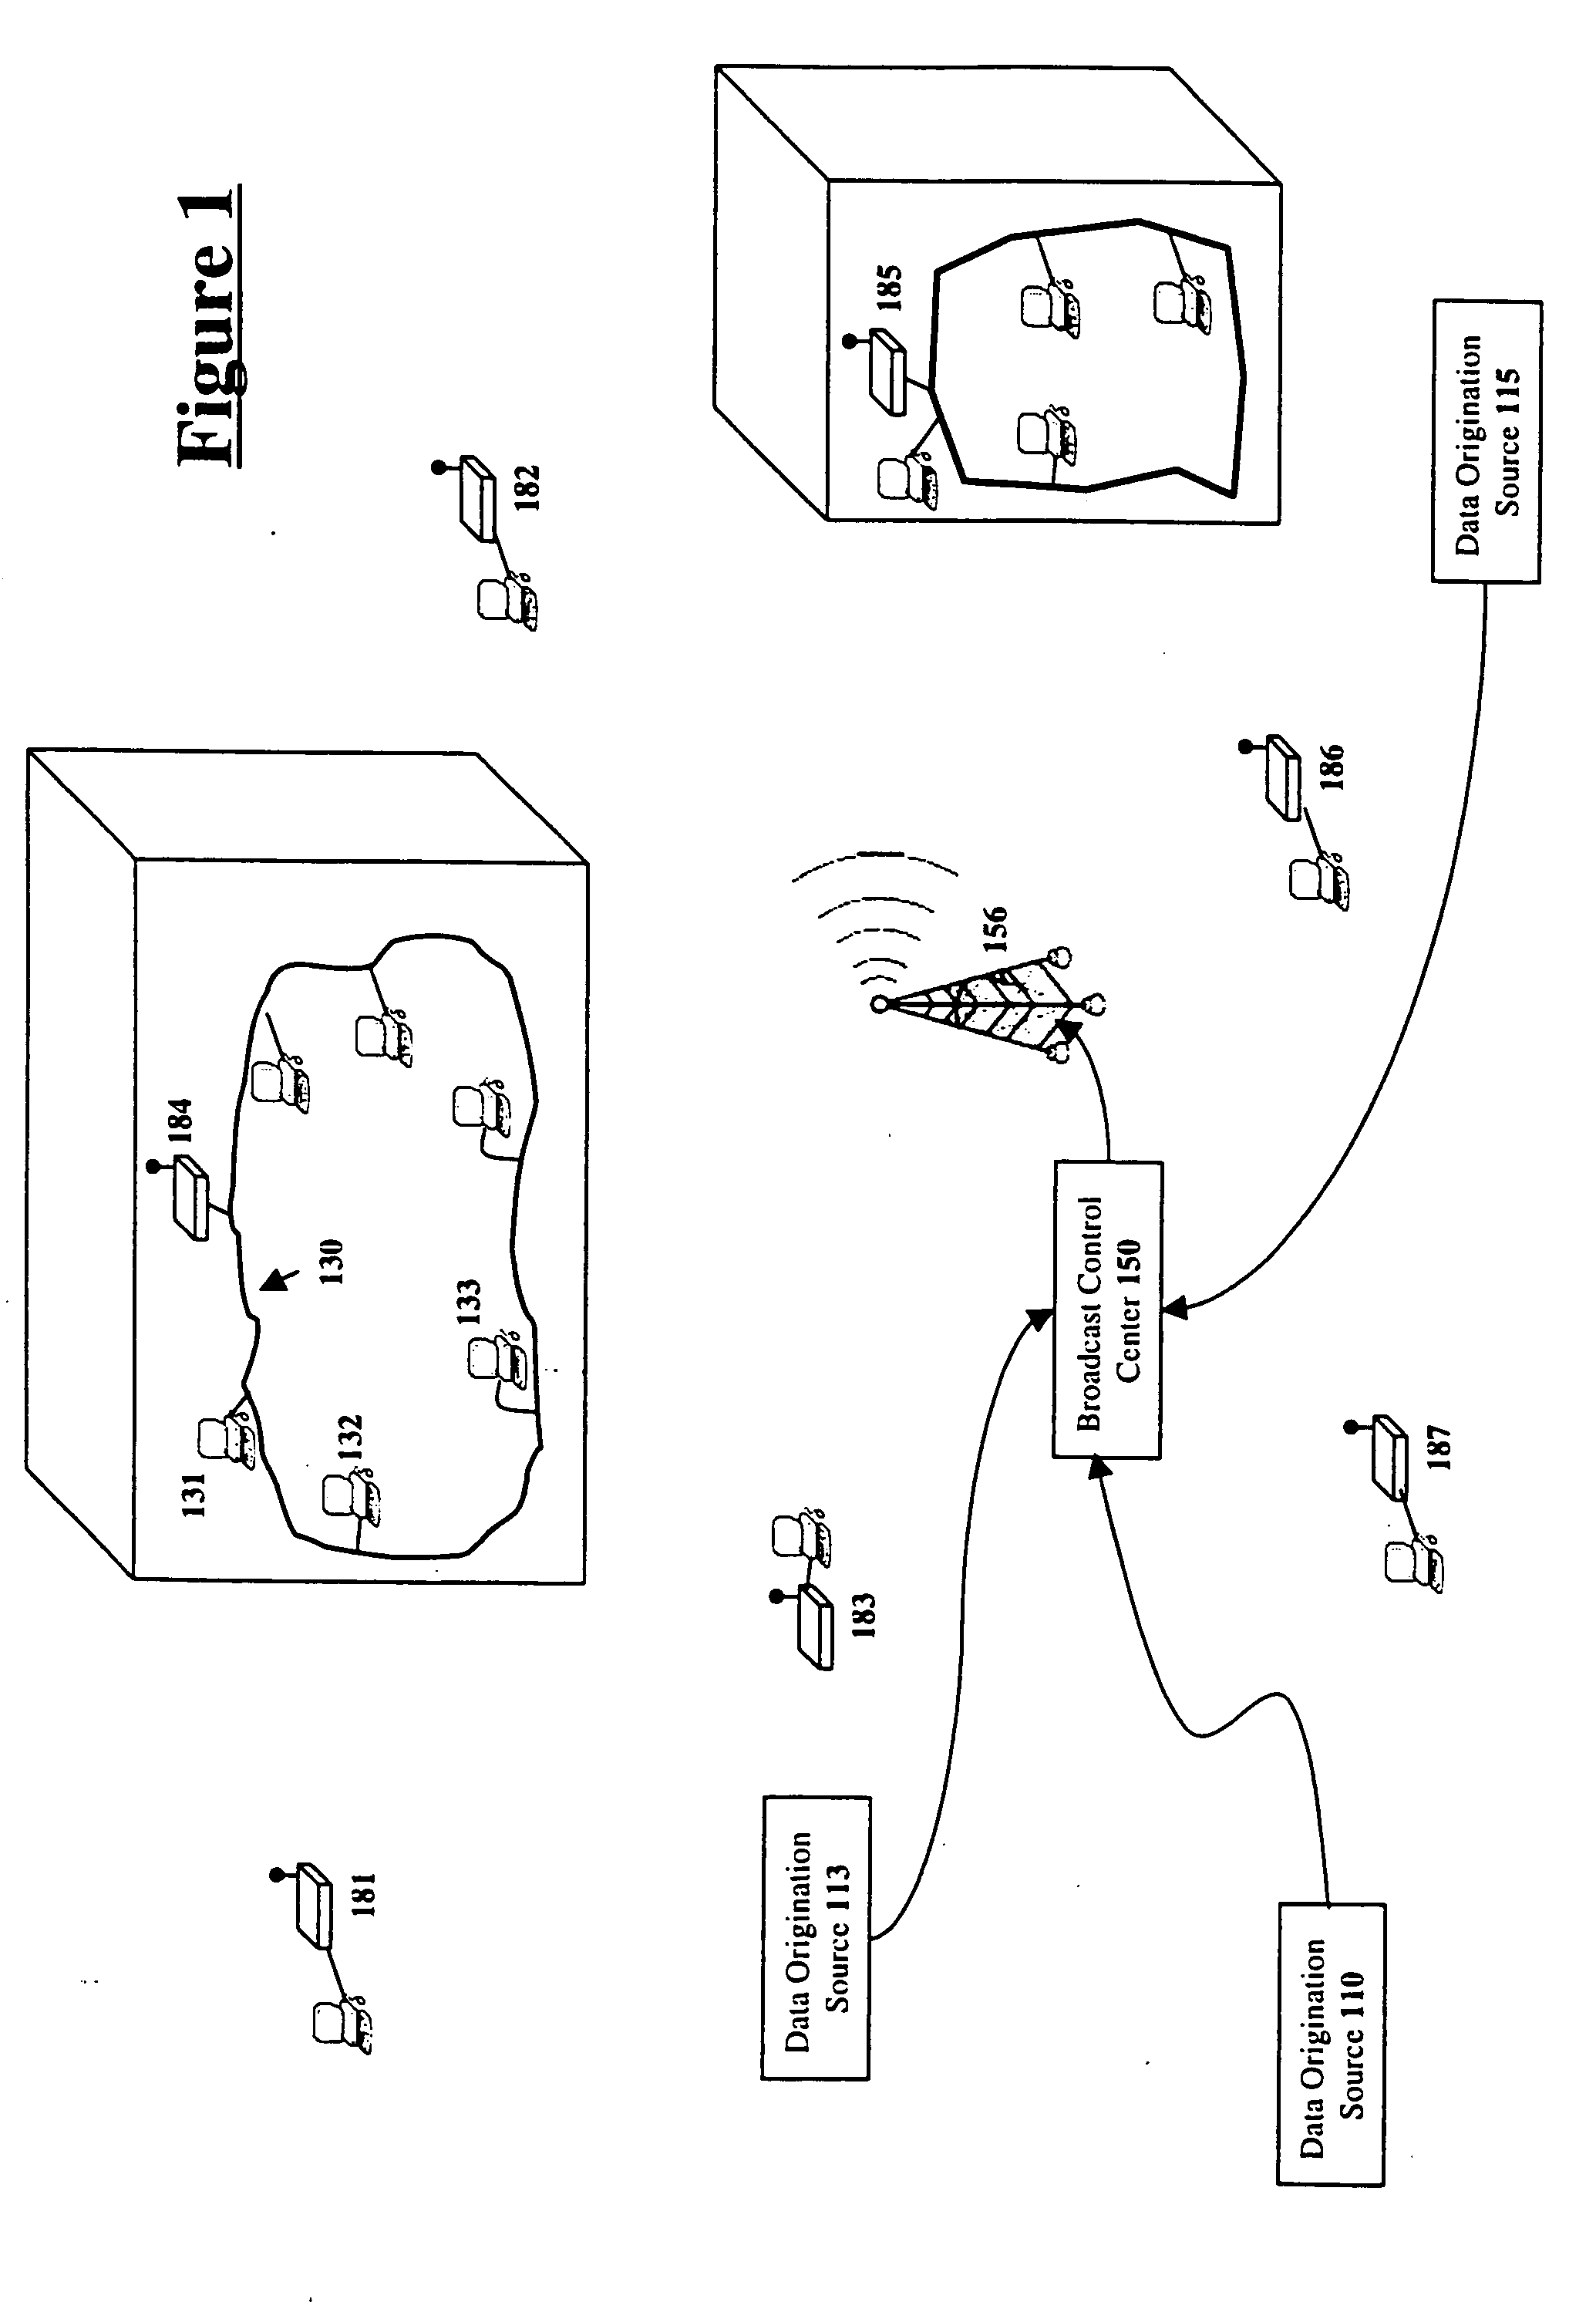 Methods and apparatus for broadcasting data